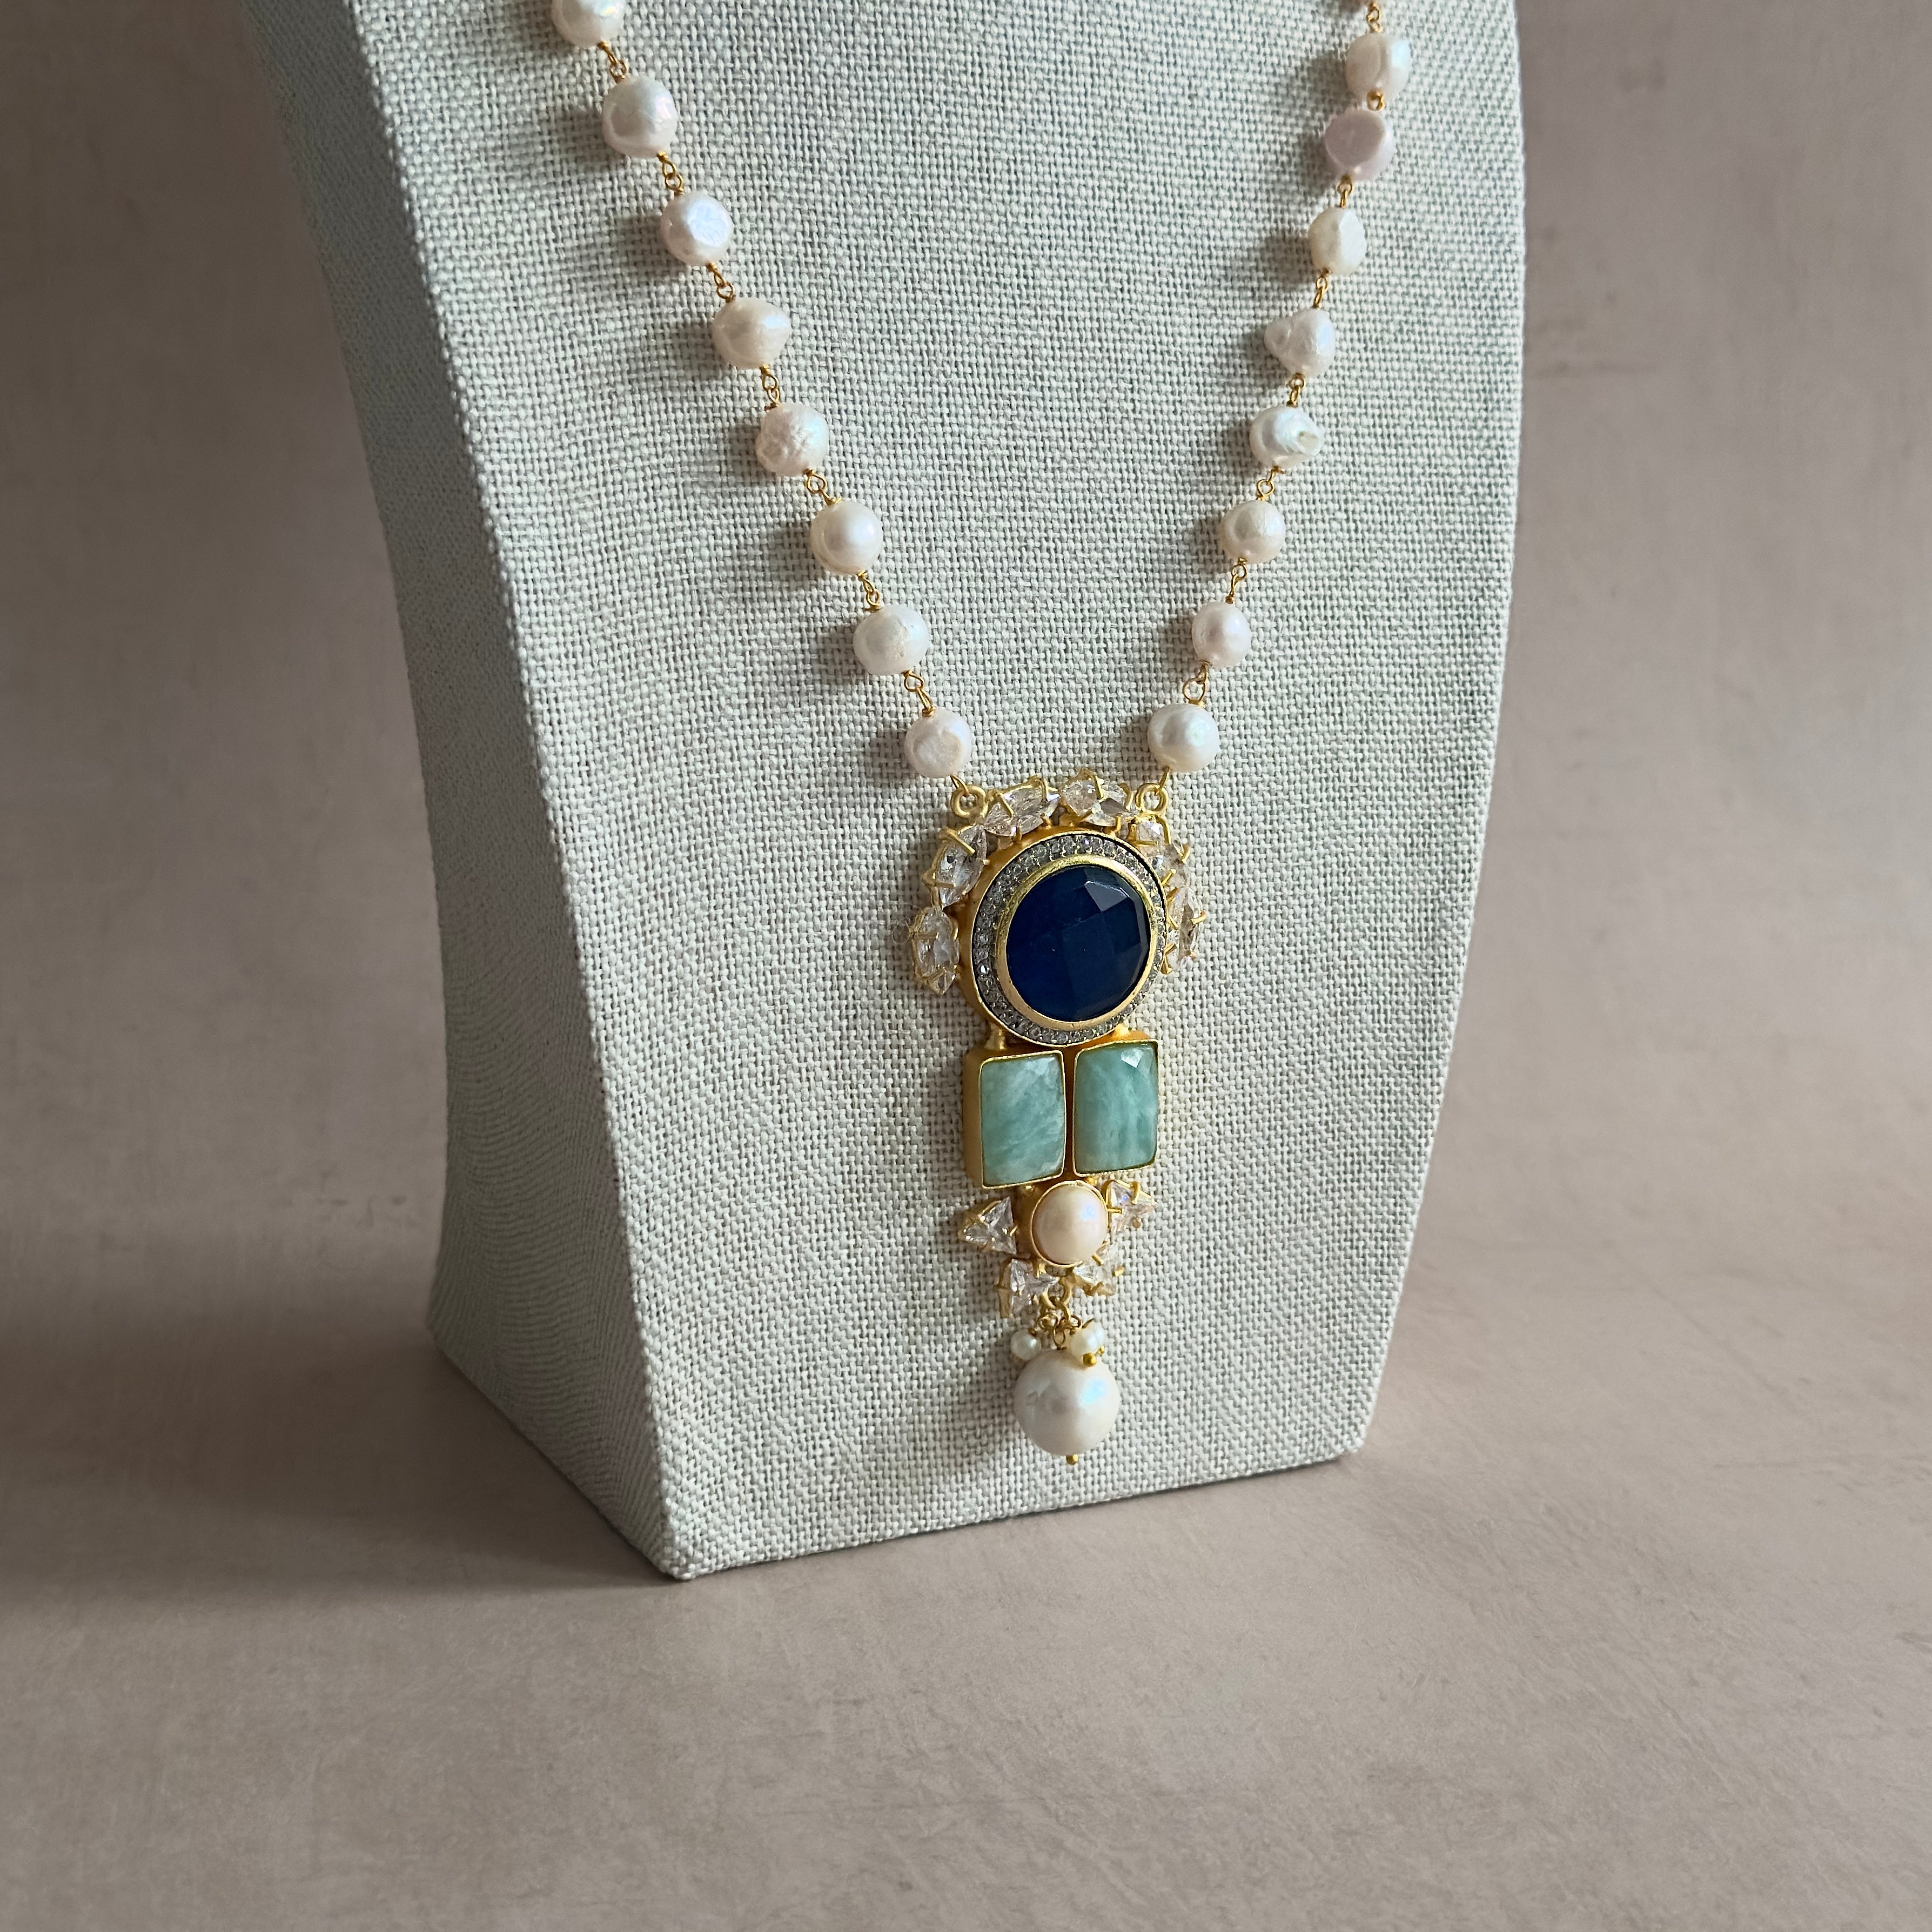 Get lost in the deep blue of our Sonam Blue Mala Set. With elegant jade hues and delicate touches of cz crystals, this set is a must-have for any classy occasion. Let the pearls add a touch of sophistication to your outfit. Who knew blue could be so chic!